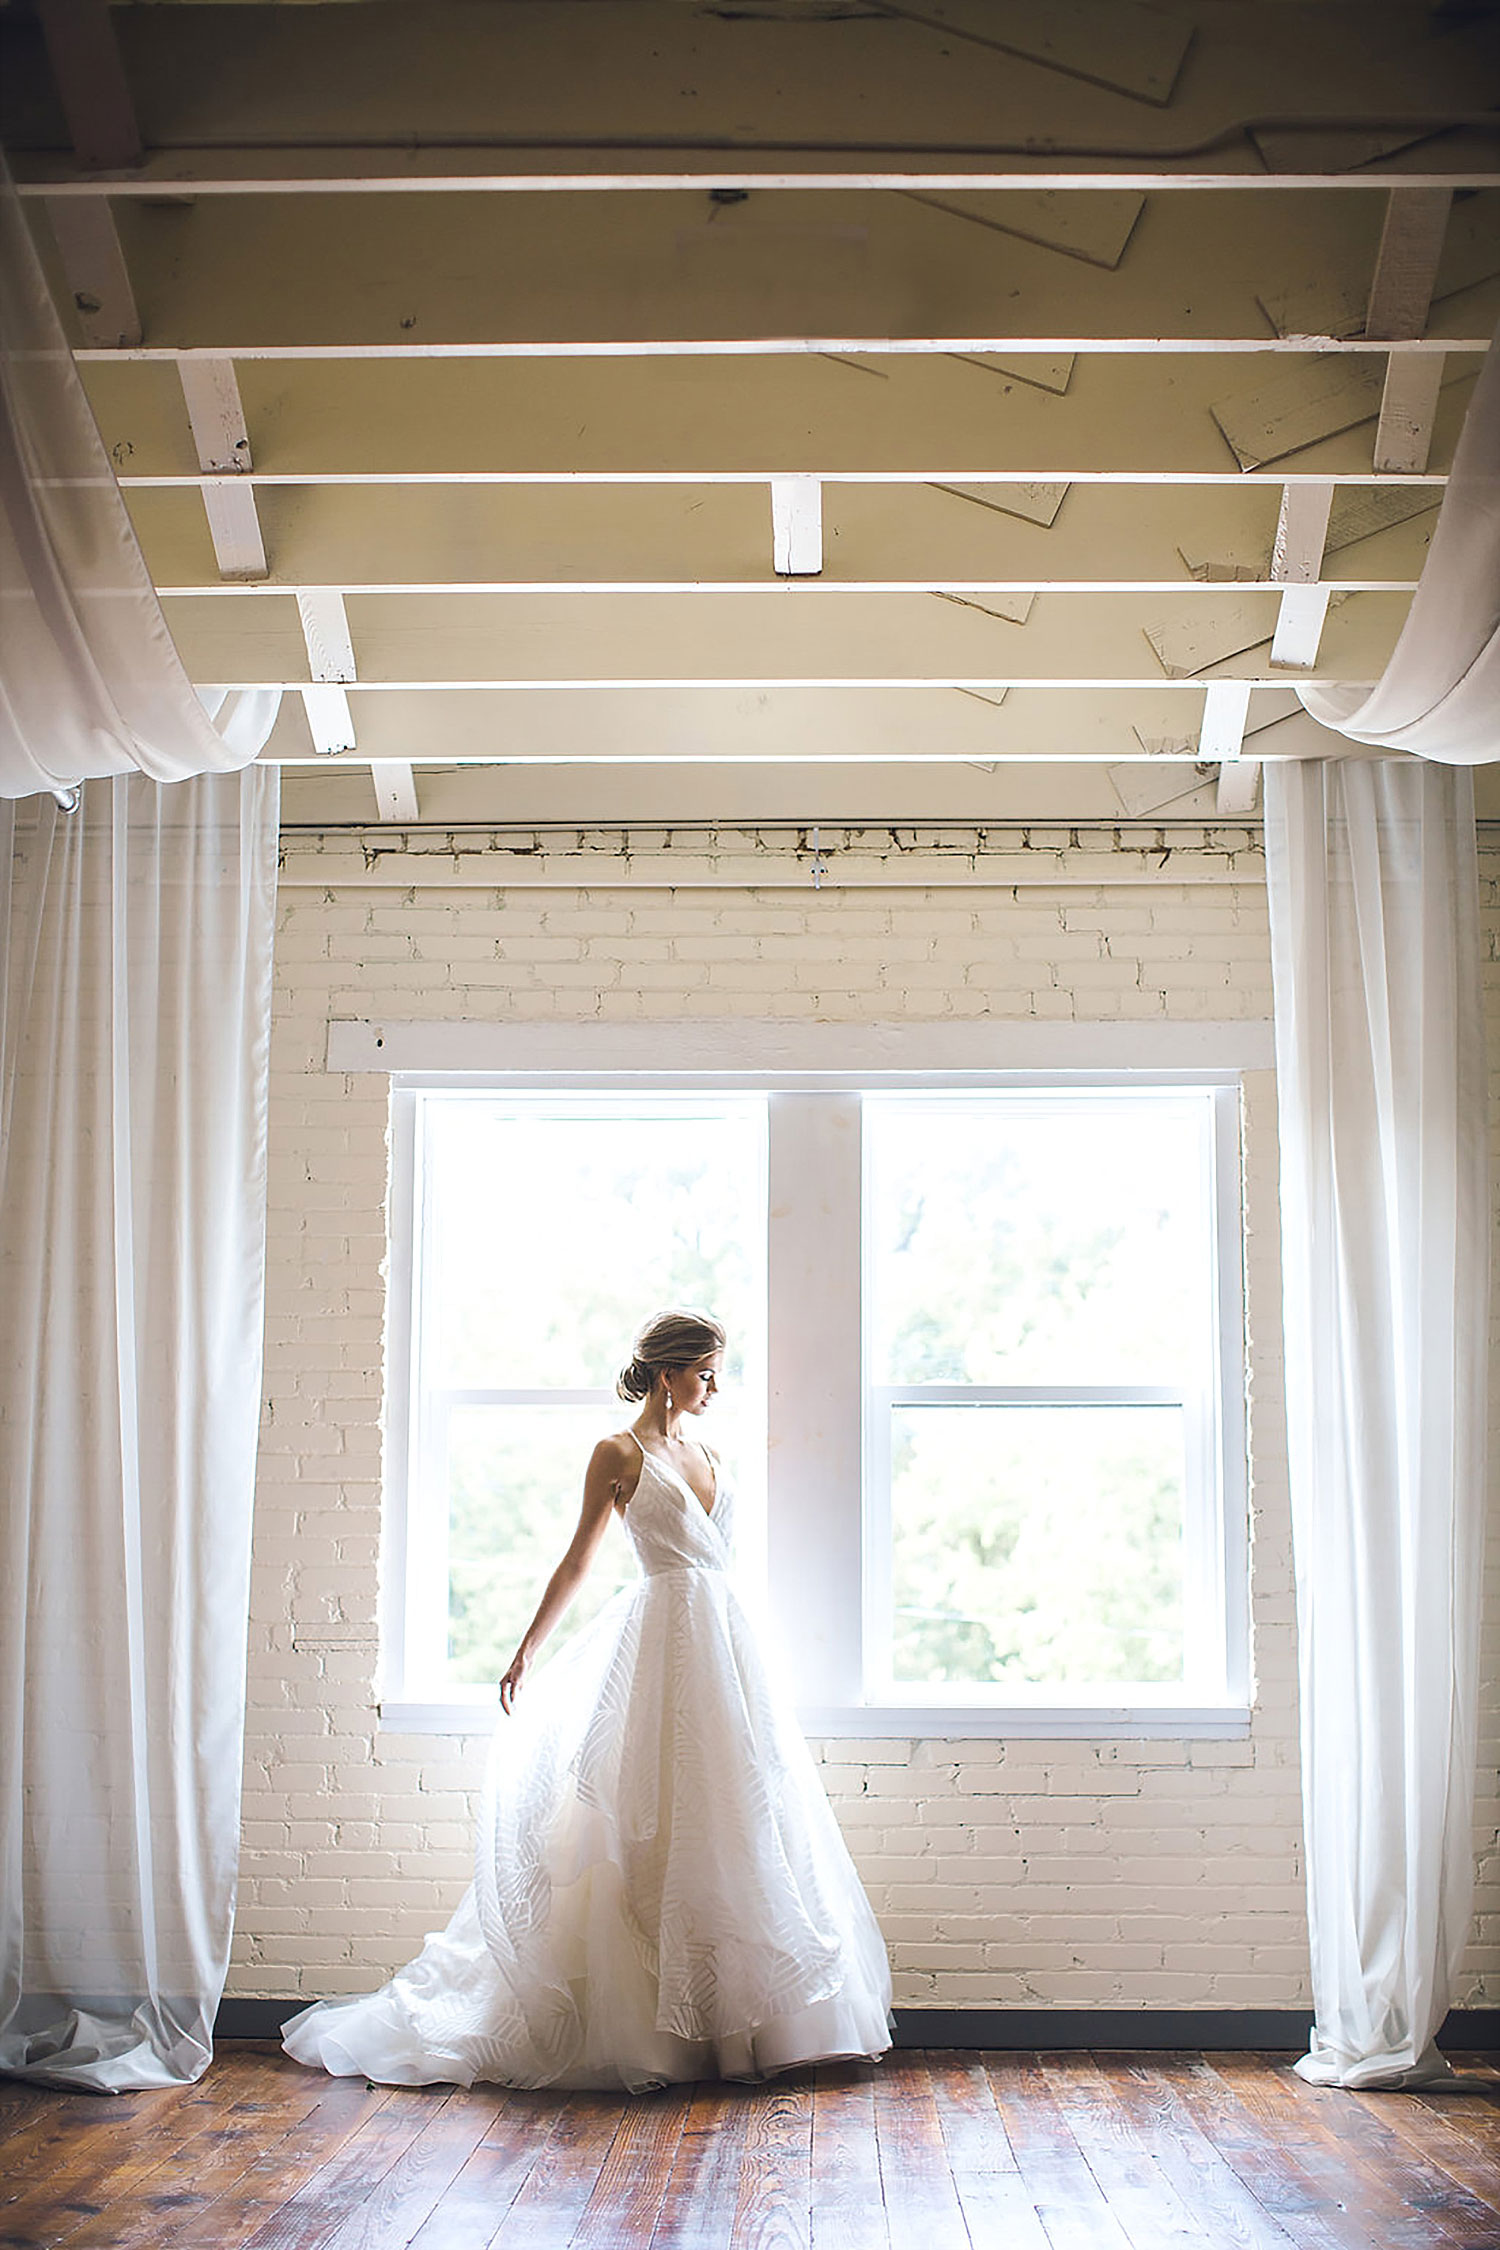 Brik Special Events Venue upstairs southern bride at window with white drapery